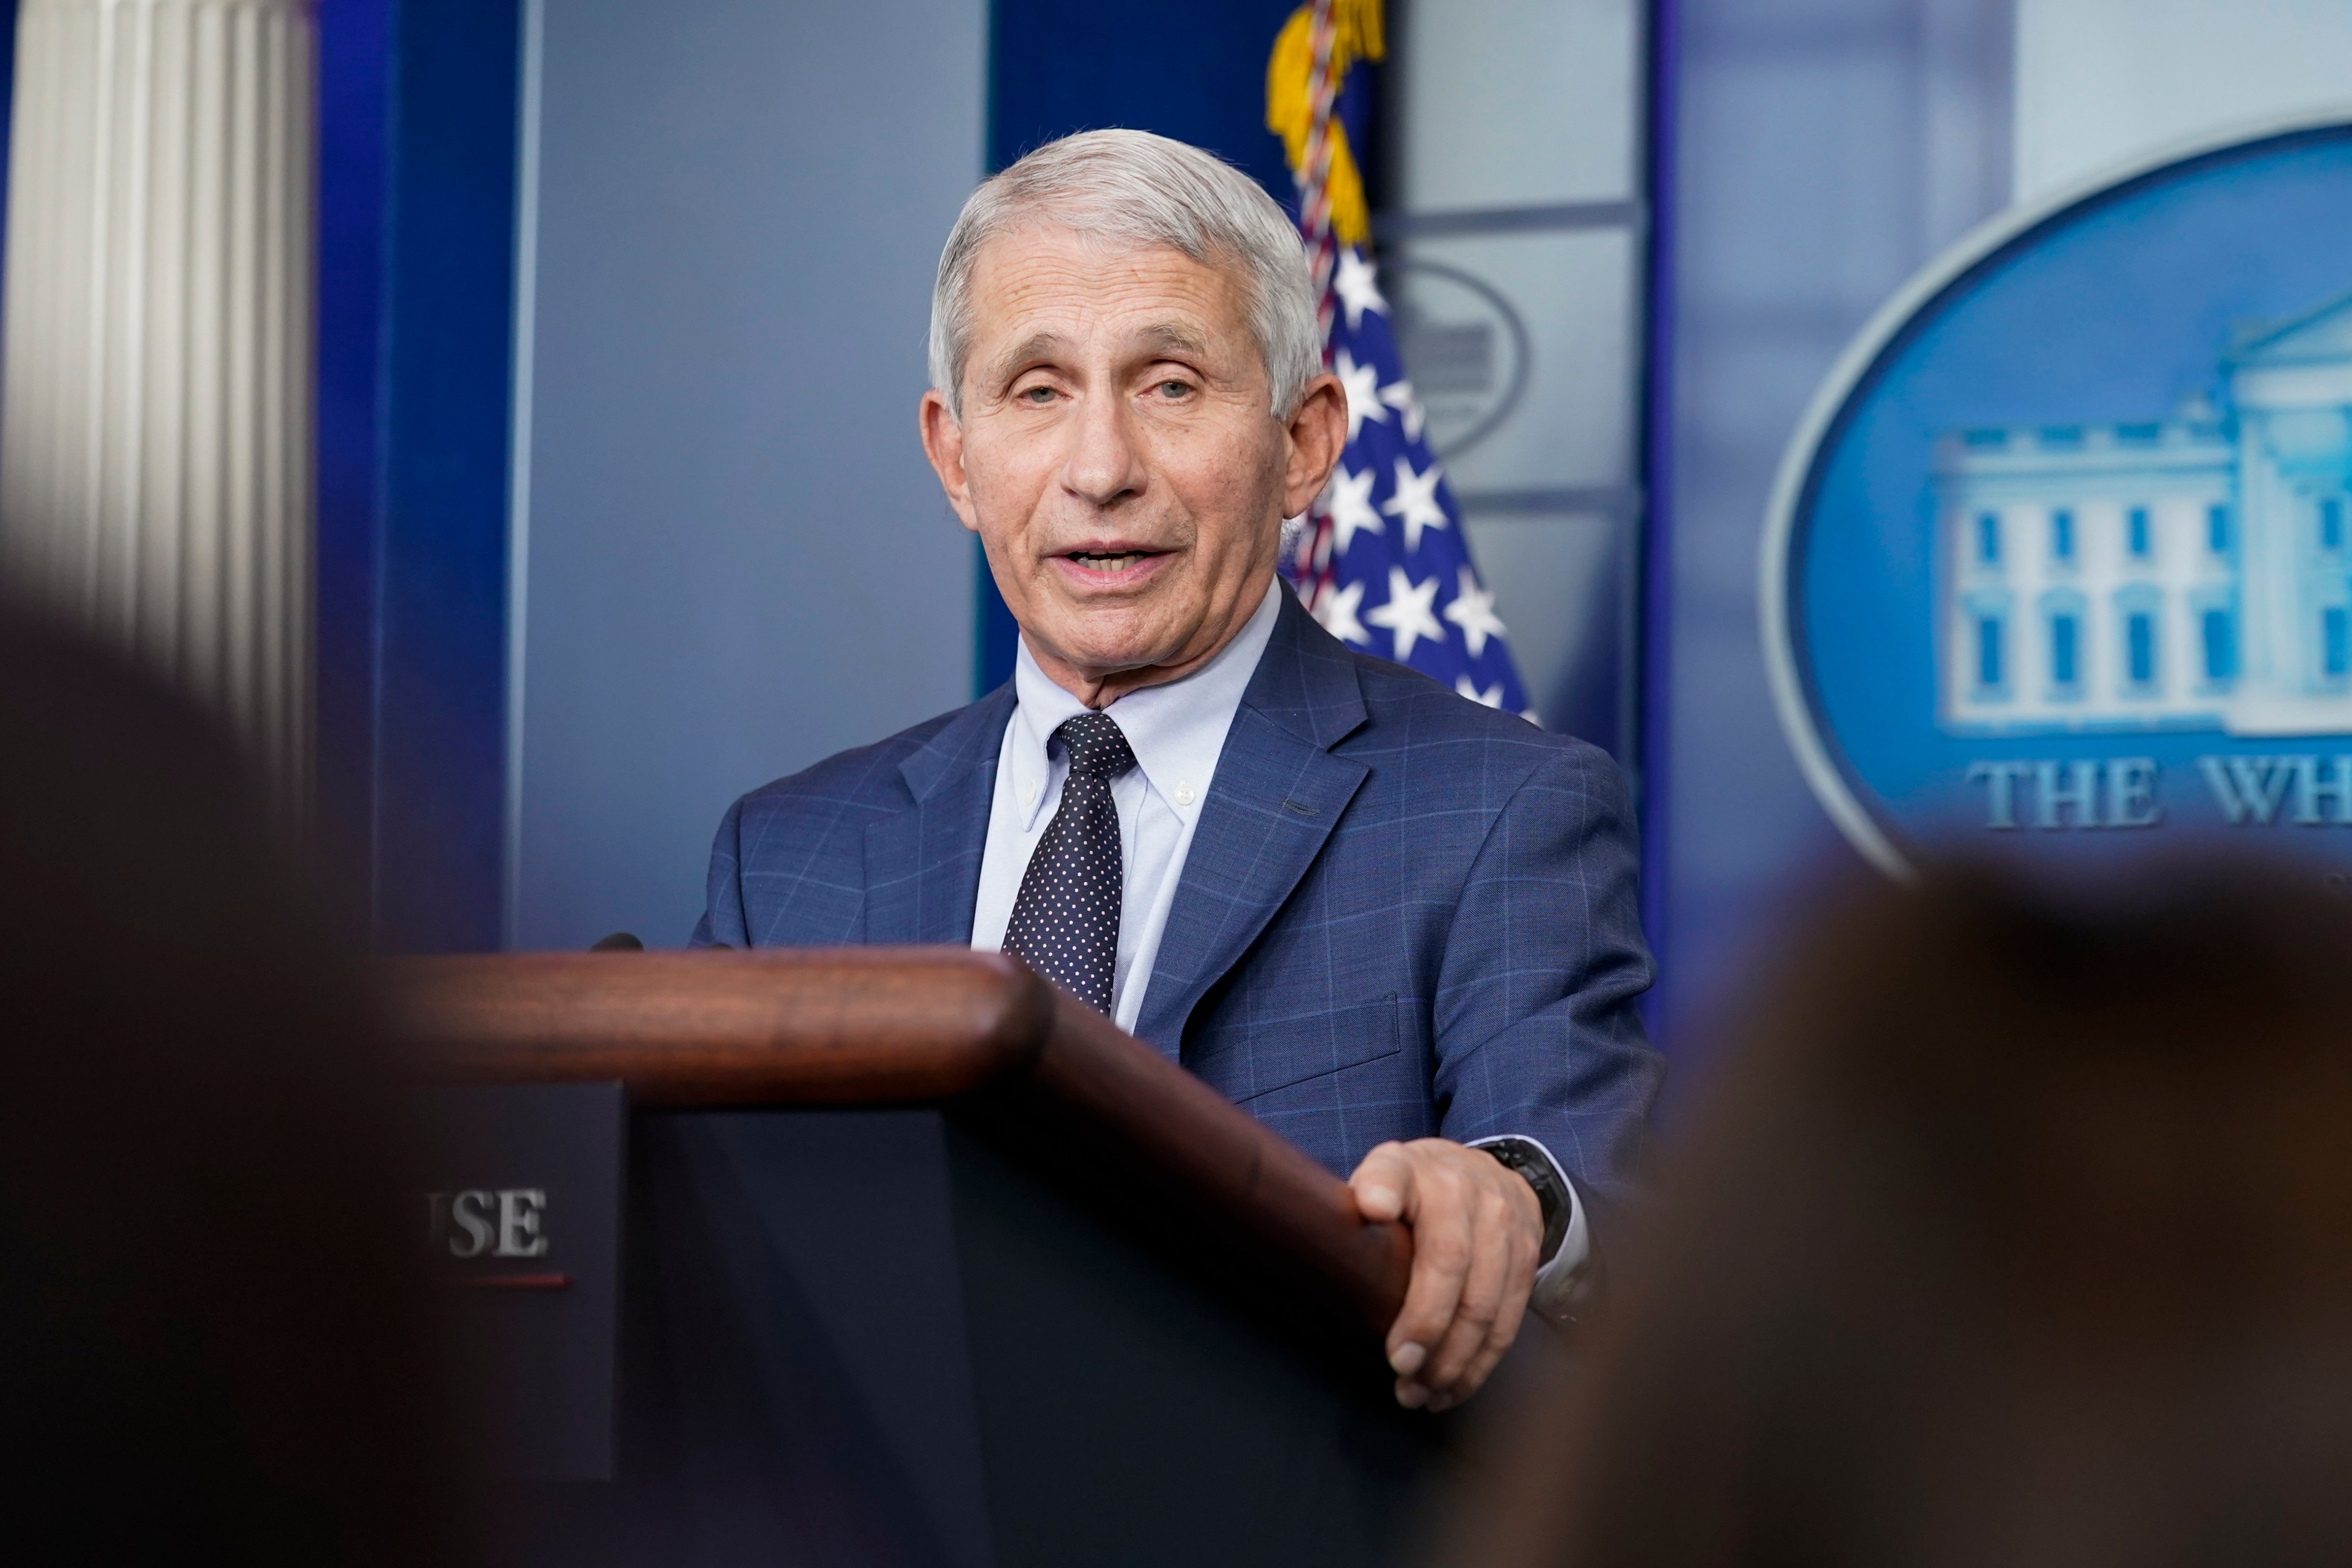 Dr. Anthony Fauci, director of the National Institute of Allergy and Infectious Diseases, speaks during the daily briefing at the White House in Washington on, Dec. 1, 2021. (Susan Walsh—AP)